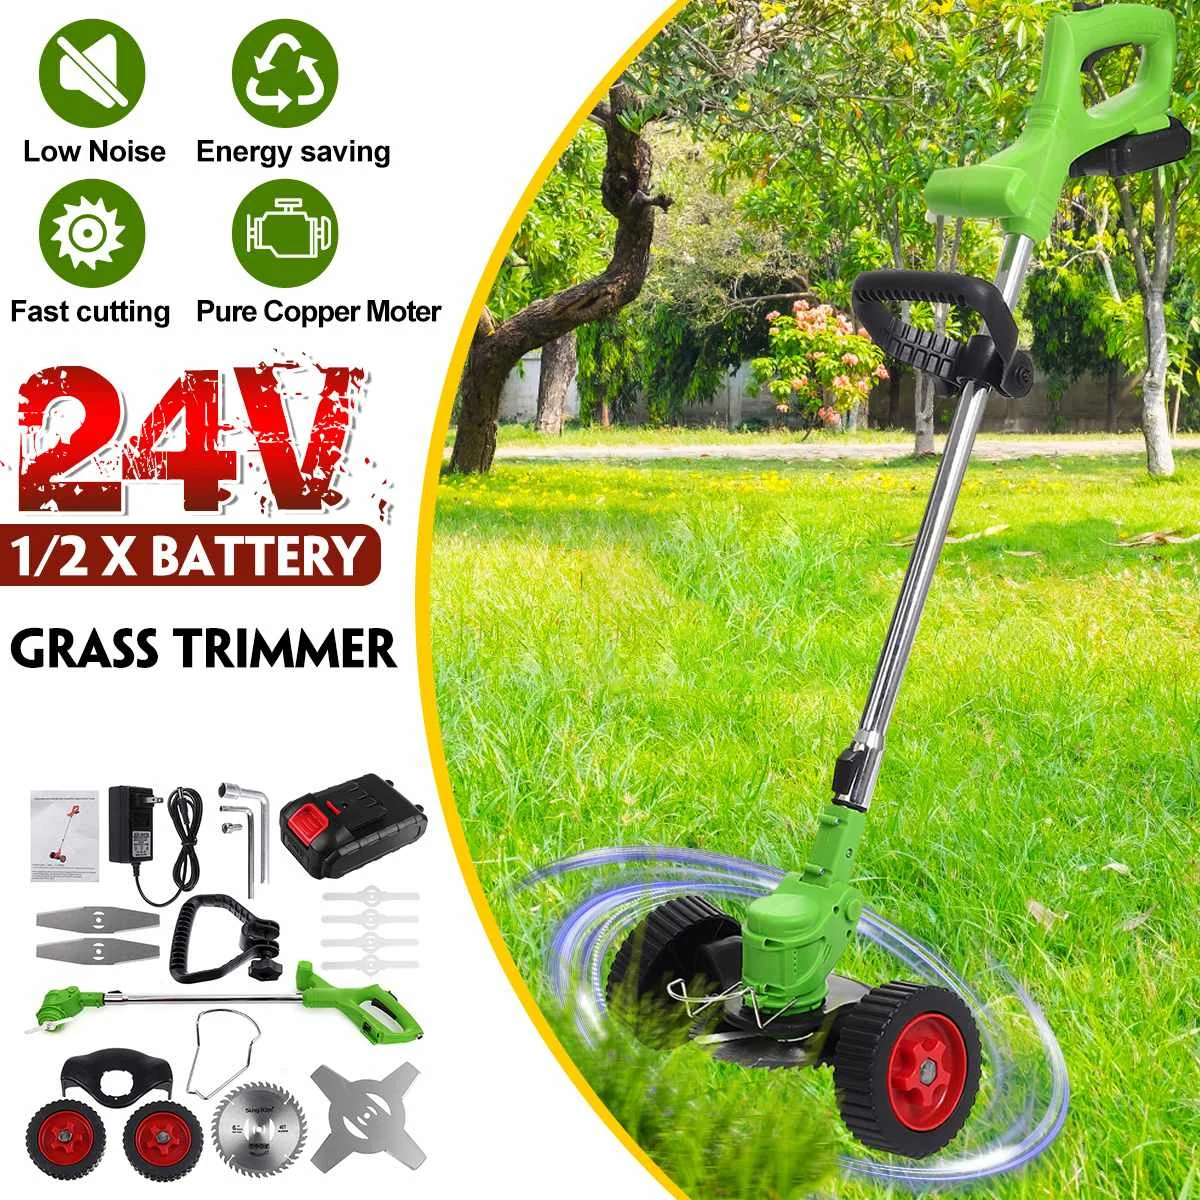 24V Electric Grass Trimmer Cordless Lawn Mower Garden Pruning Tools With 2PC 3.0Ah Battery & Wheels